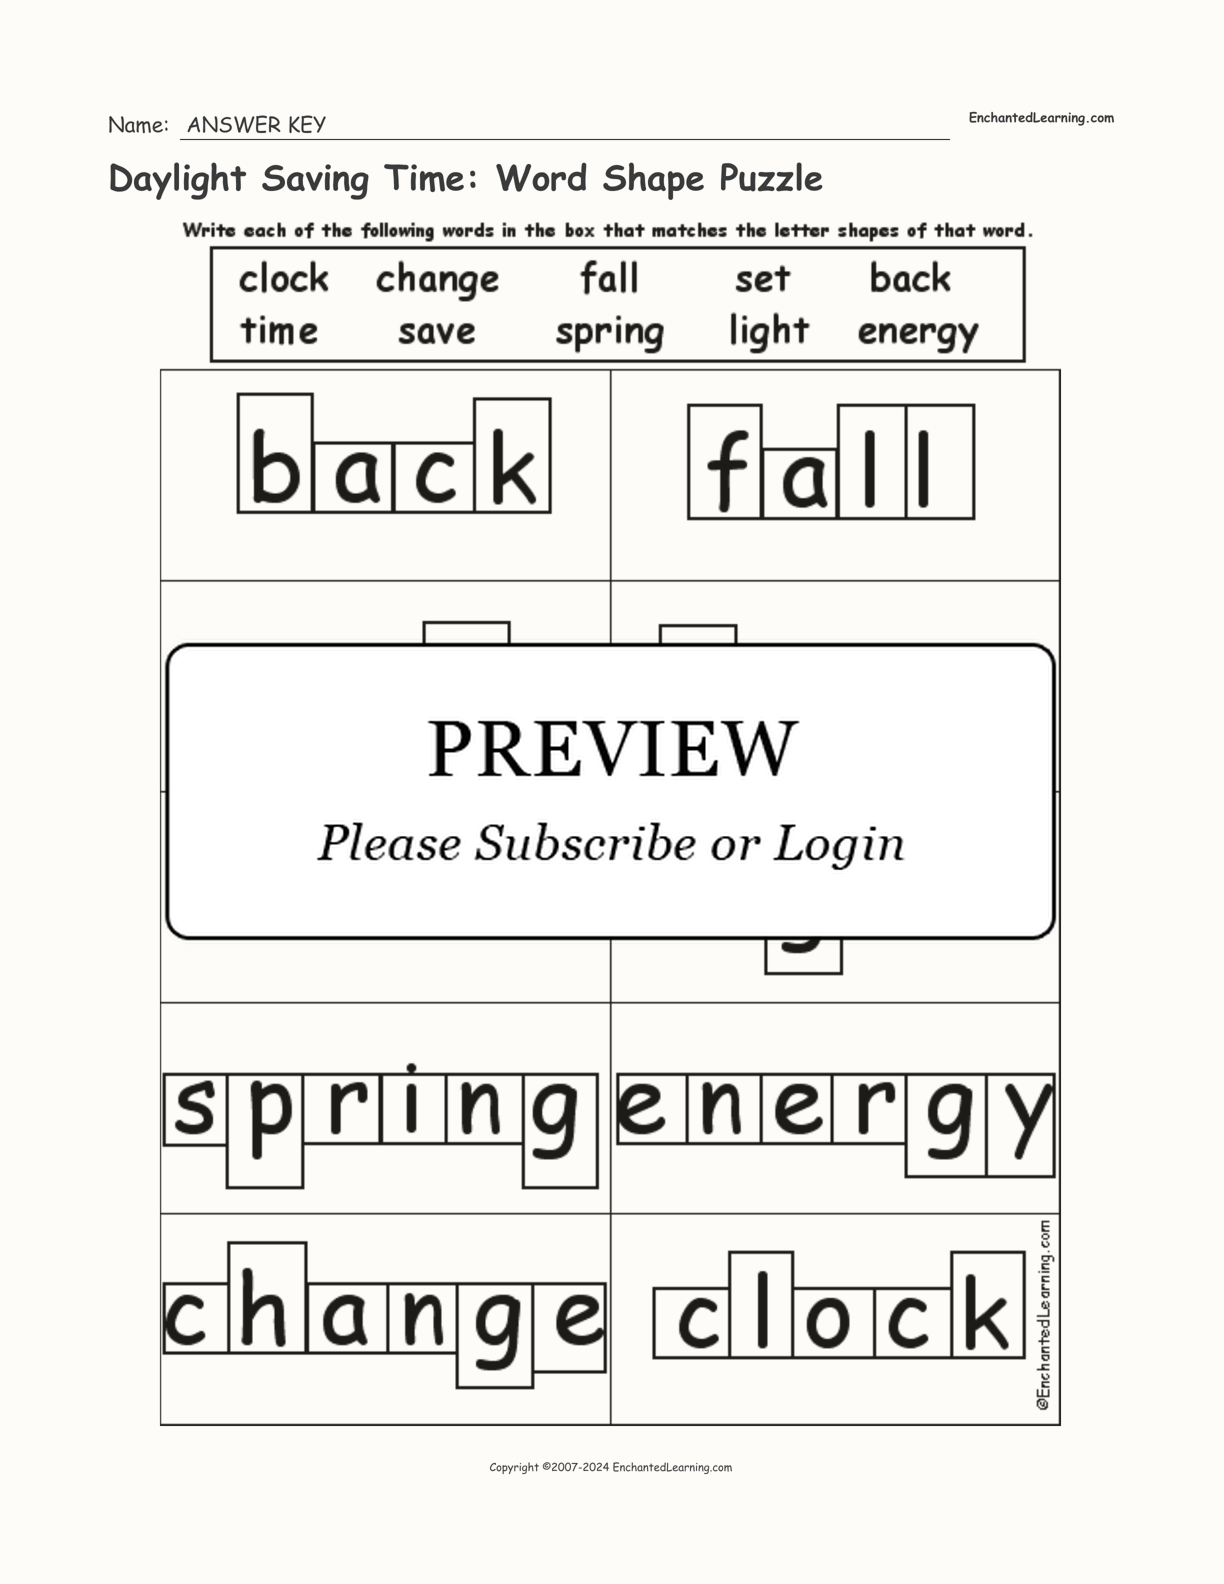 Daylight Saving Time: Word Shape Puzzle interactive worksheet page 2